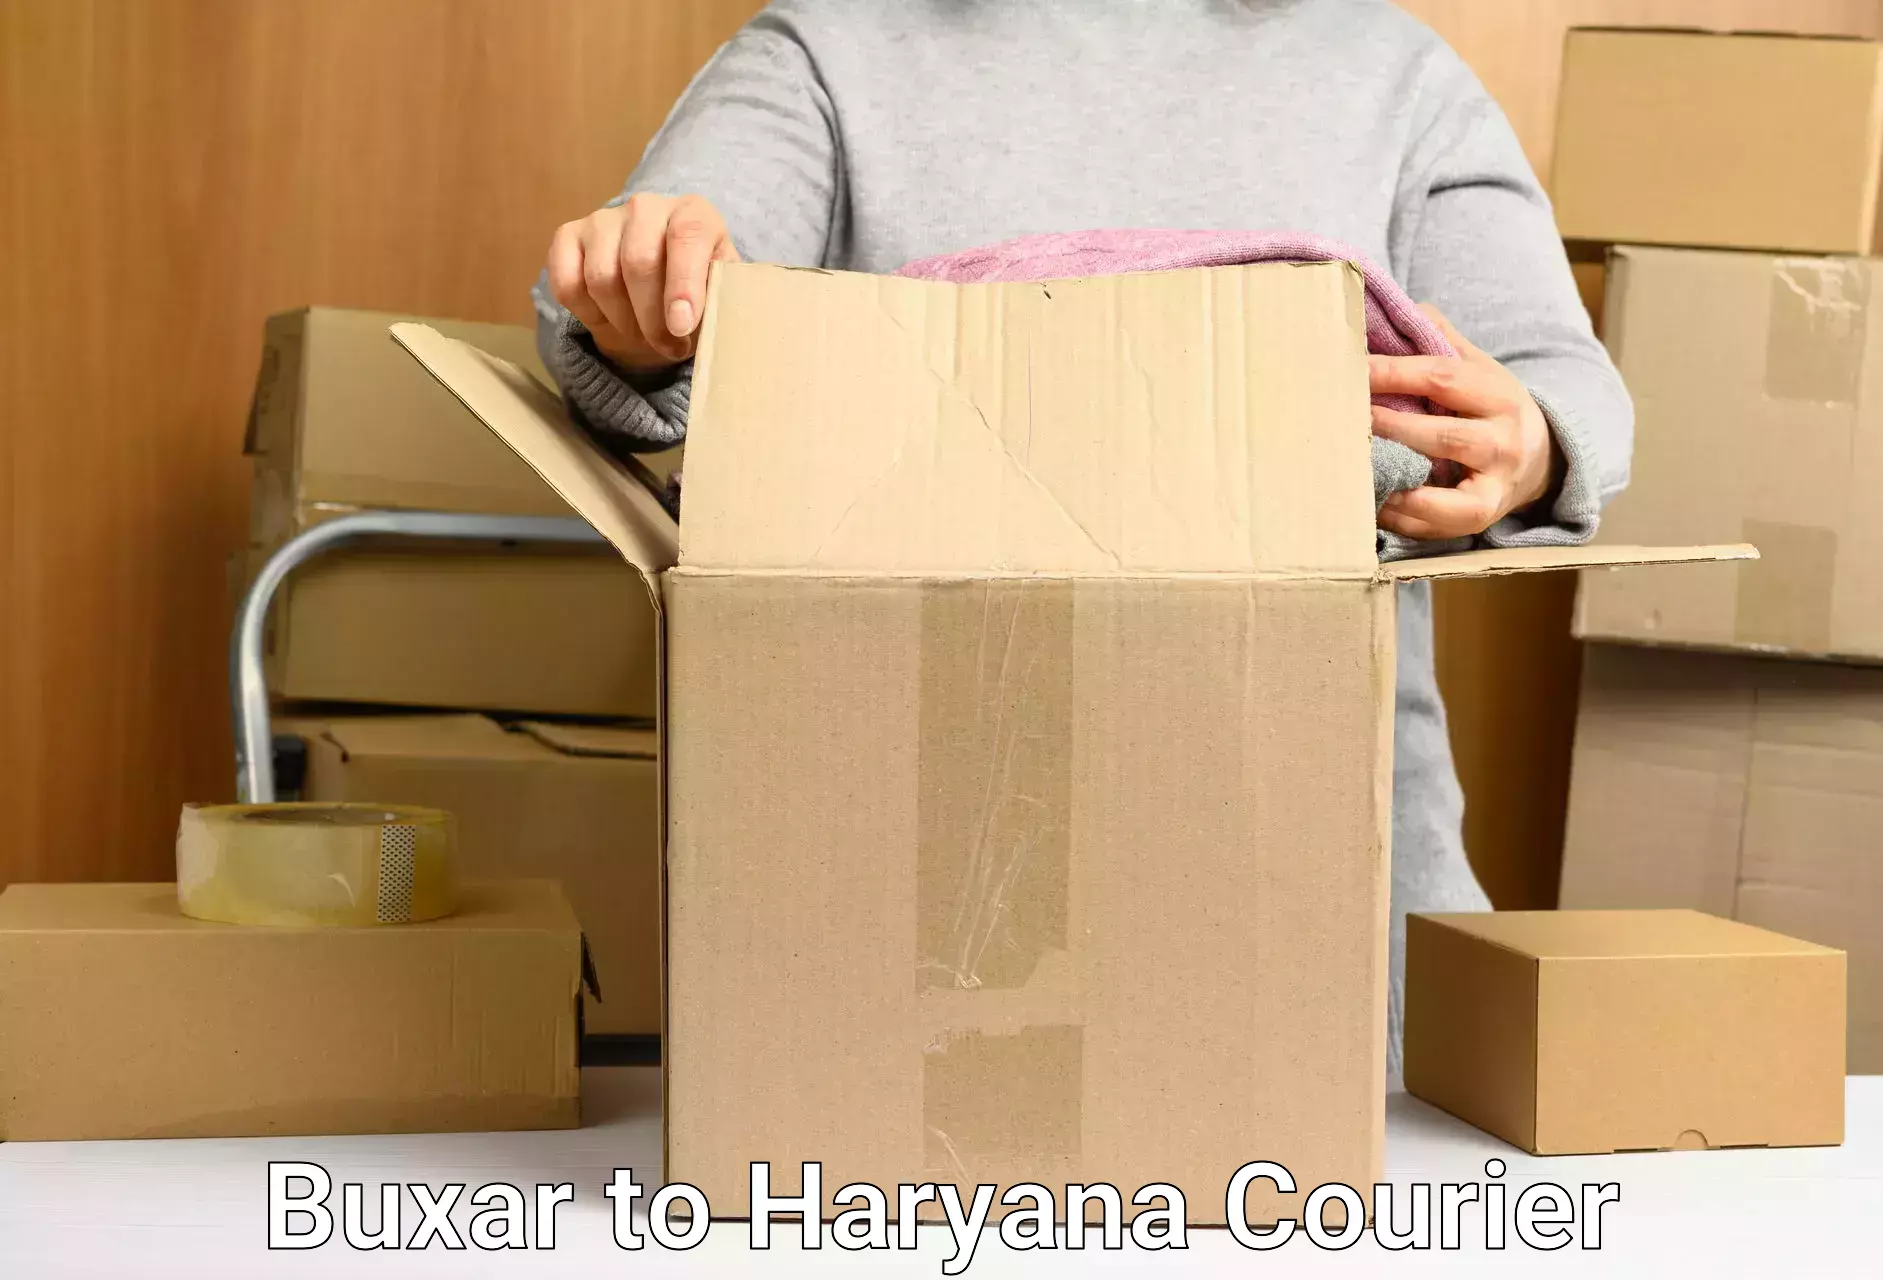 Easy access courier services Buxar to Ambala